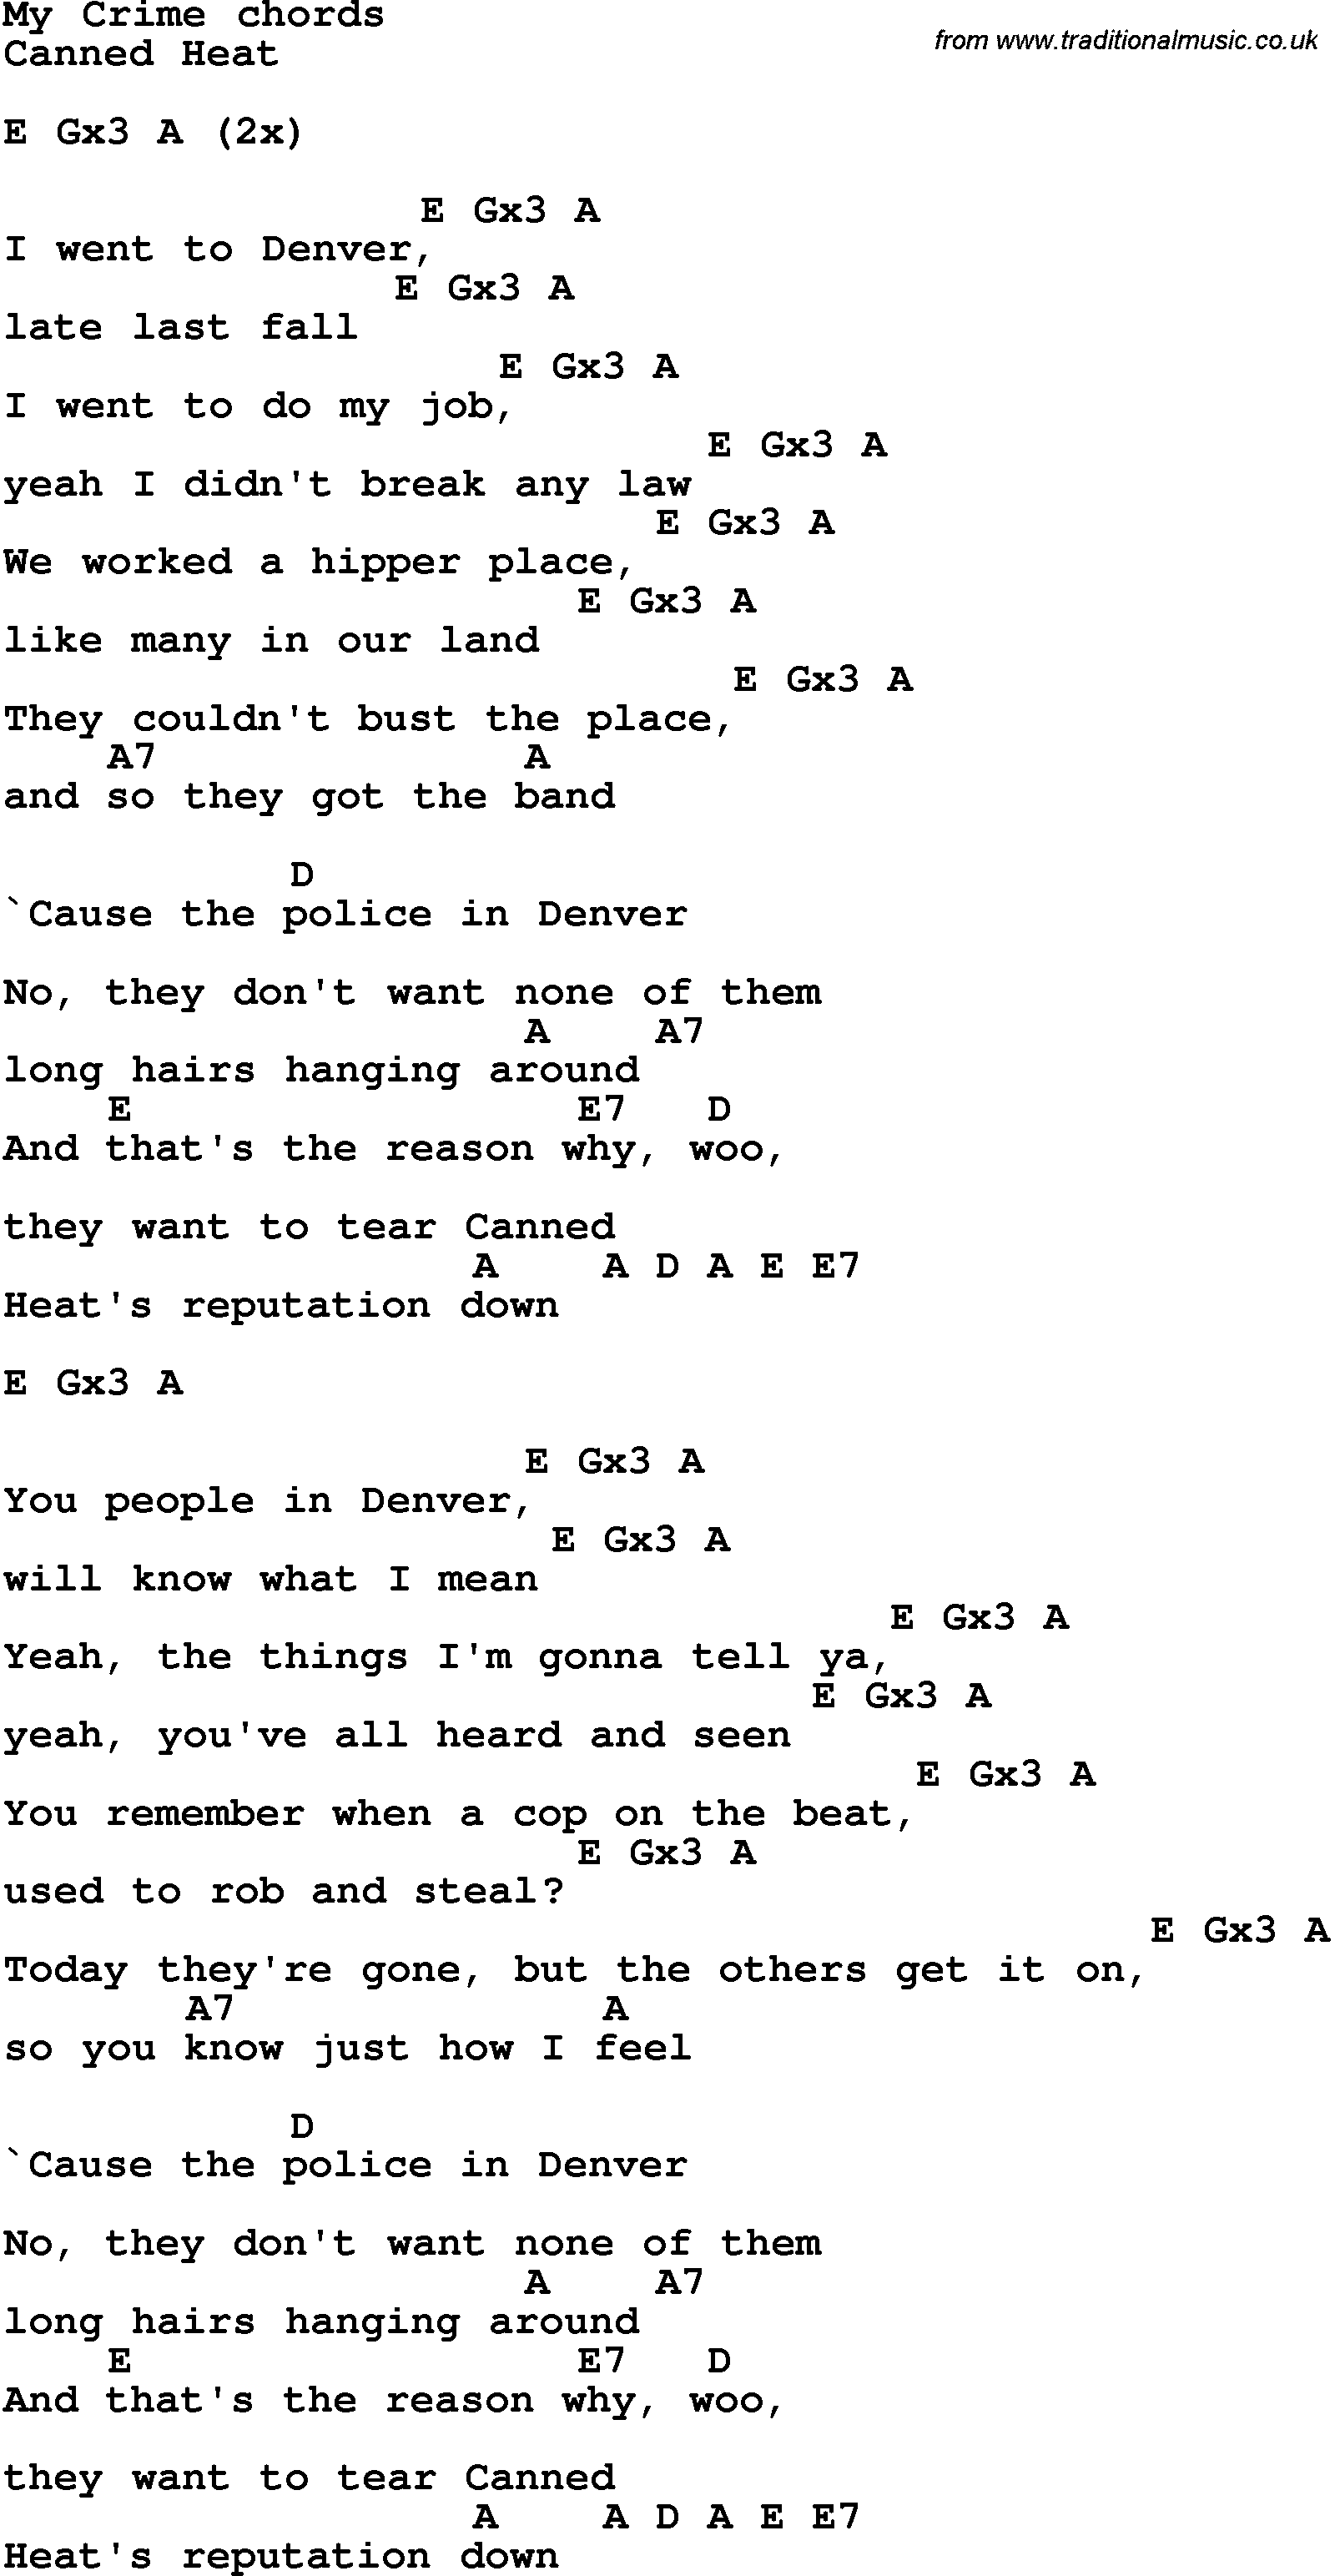 Song Lyrics with guitar chords for My Crime